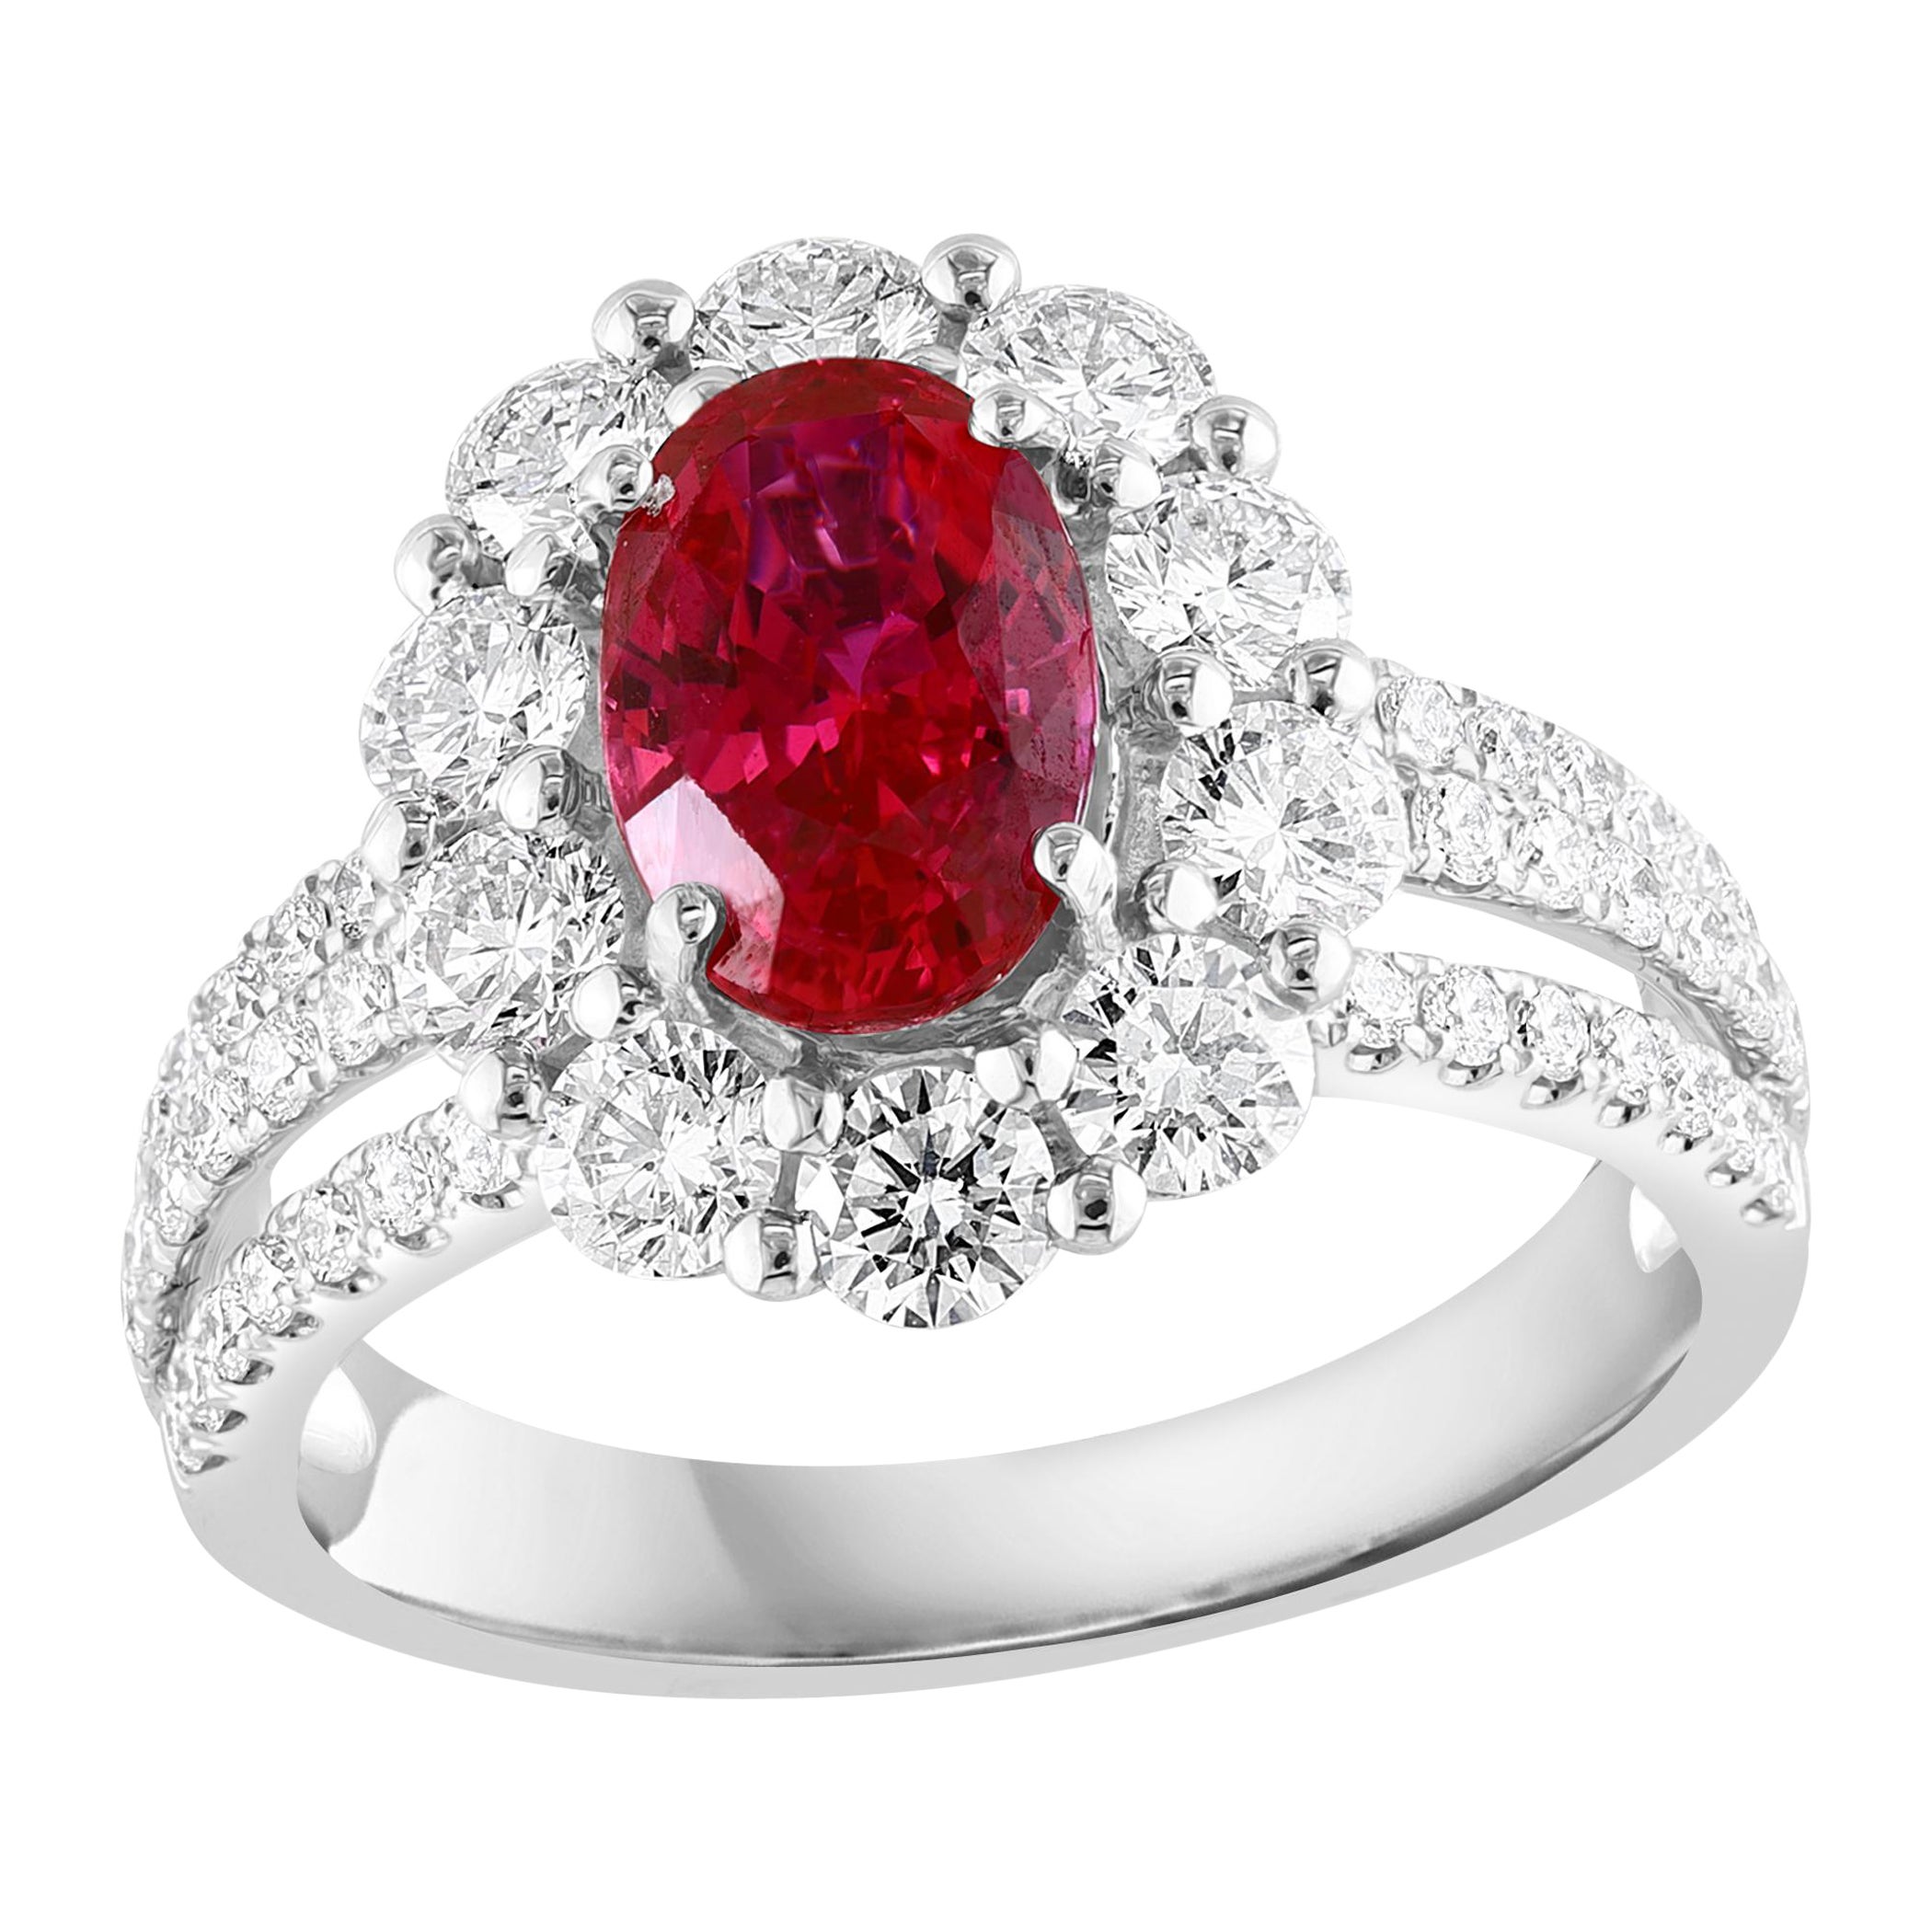 2.05 Carat Oval Cut Natural Ruby and Diamond Engagement Ring in 18K White Gold